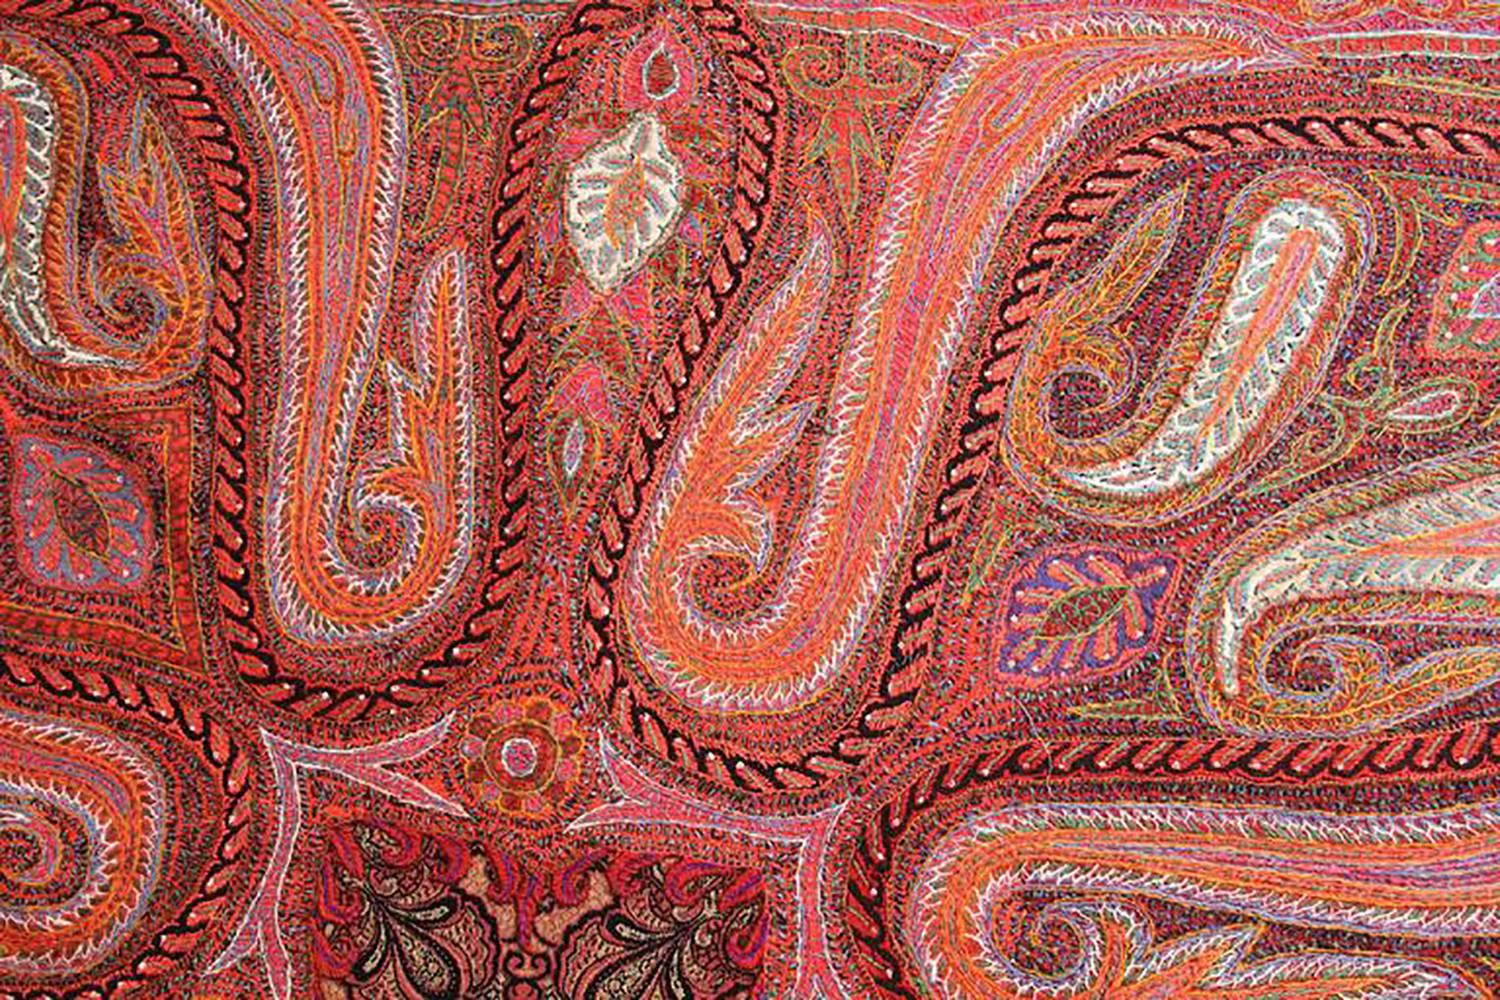 Antique Indian Embroidered Paisley Shawl Blanket 2